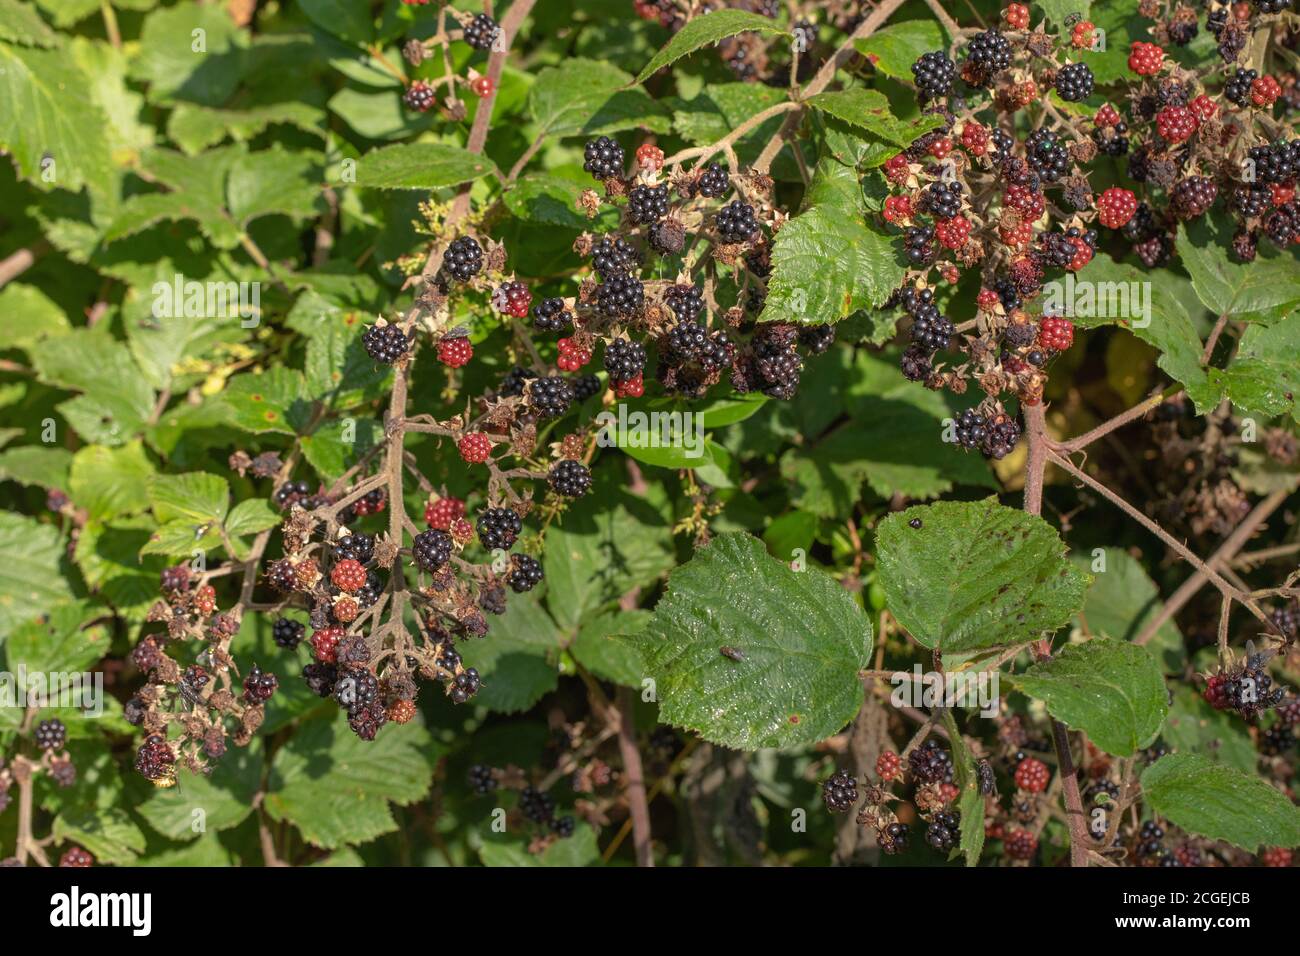 Blackberries (Rubus fruticosus). Individual segments, berries, in different stages of ripening. Rampant, spreading, clambering, green flowering plants Stock Photo